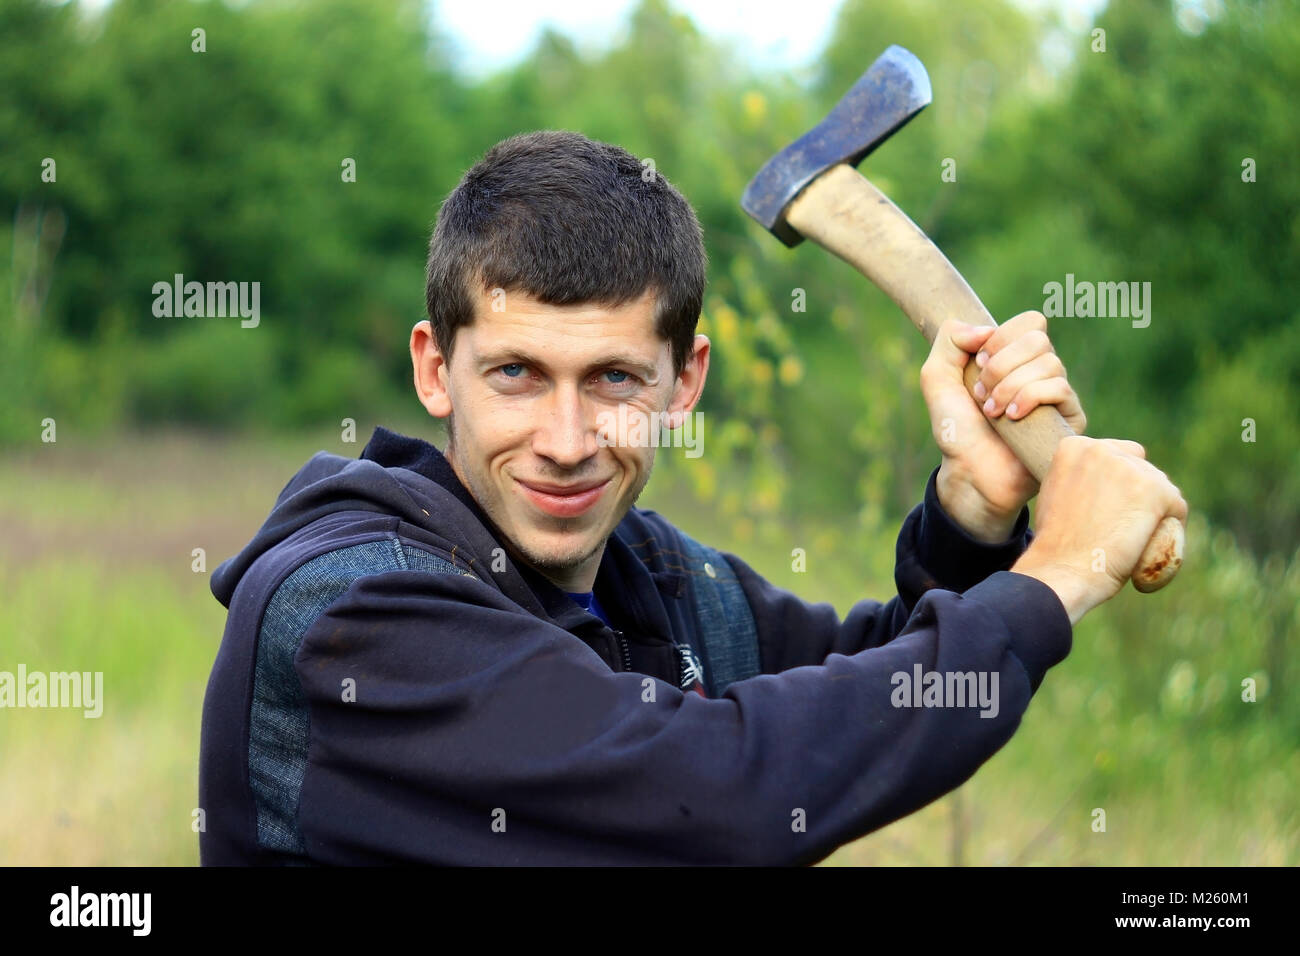 Young man with an axe chopping someone in summer forest Stock Photo